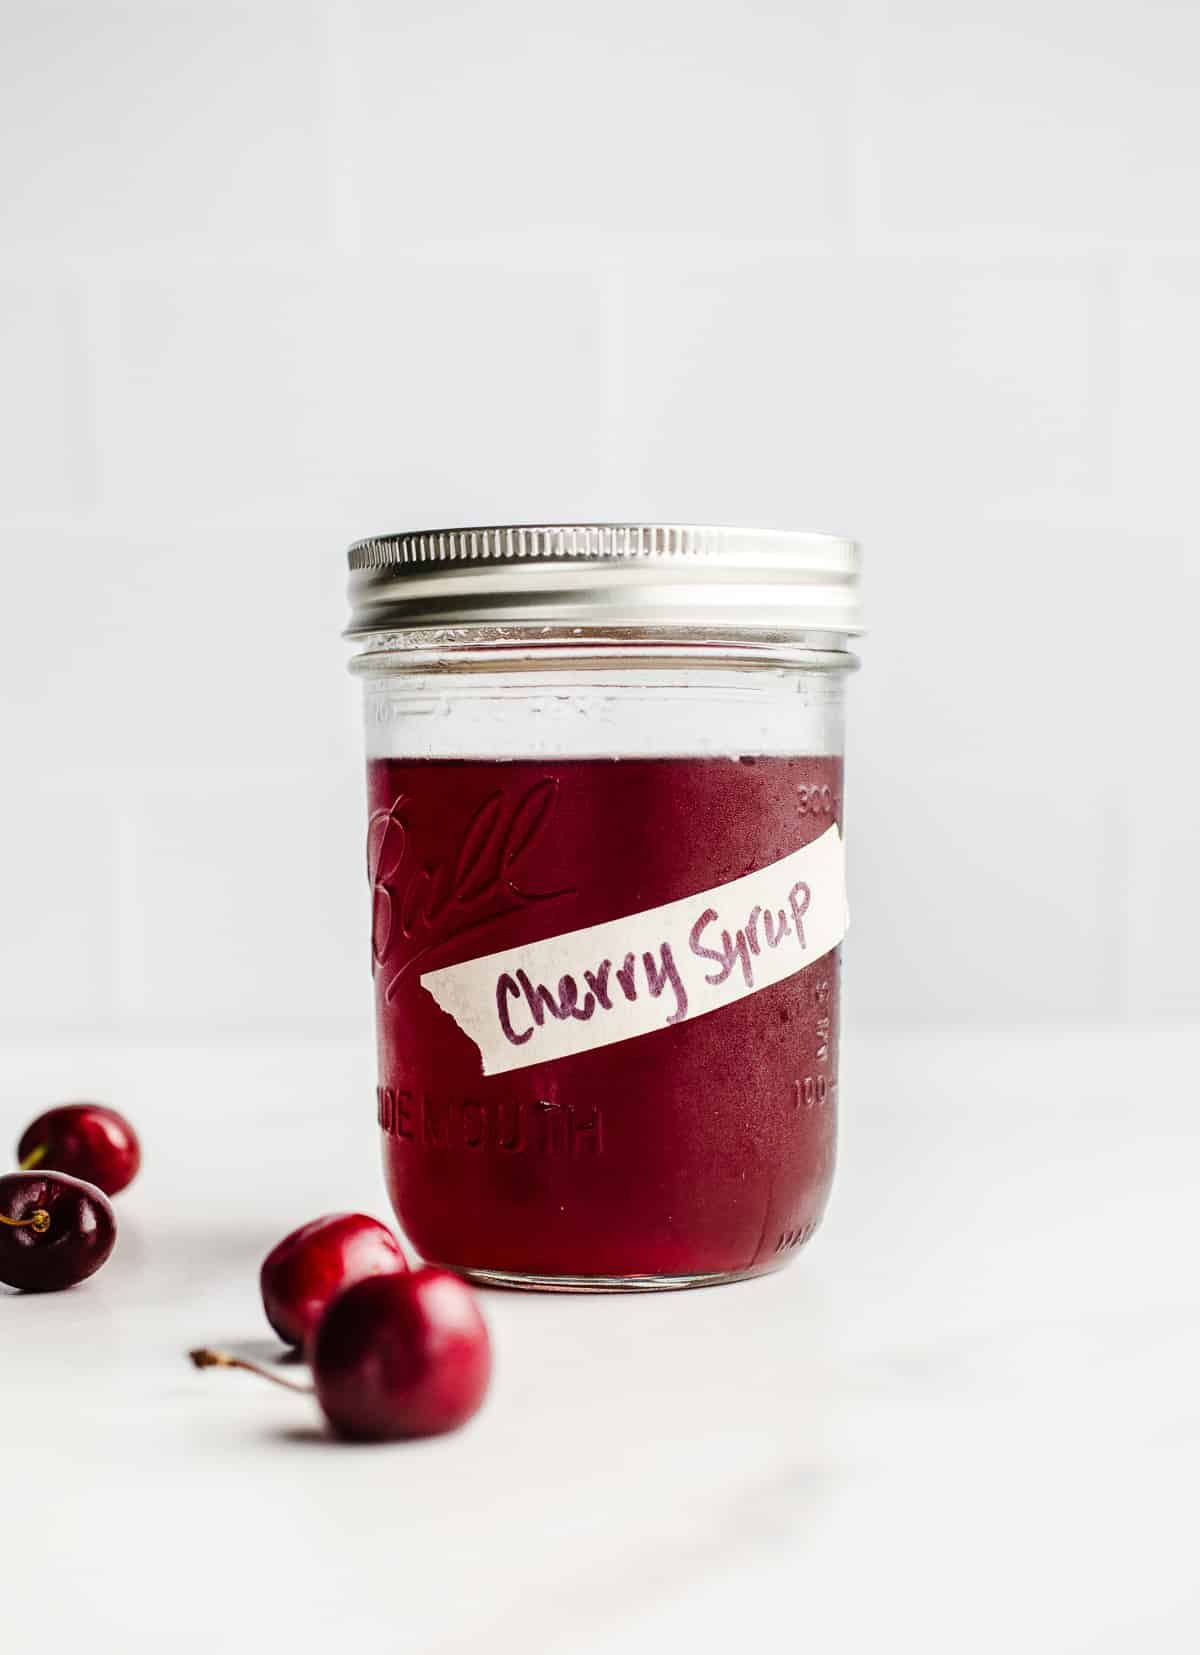 A mason jar filled with cherry syrup.